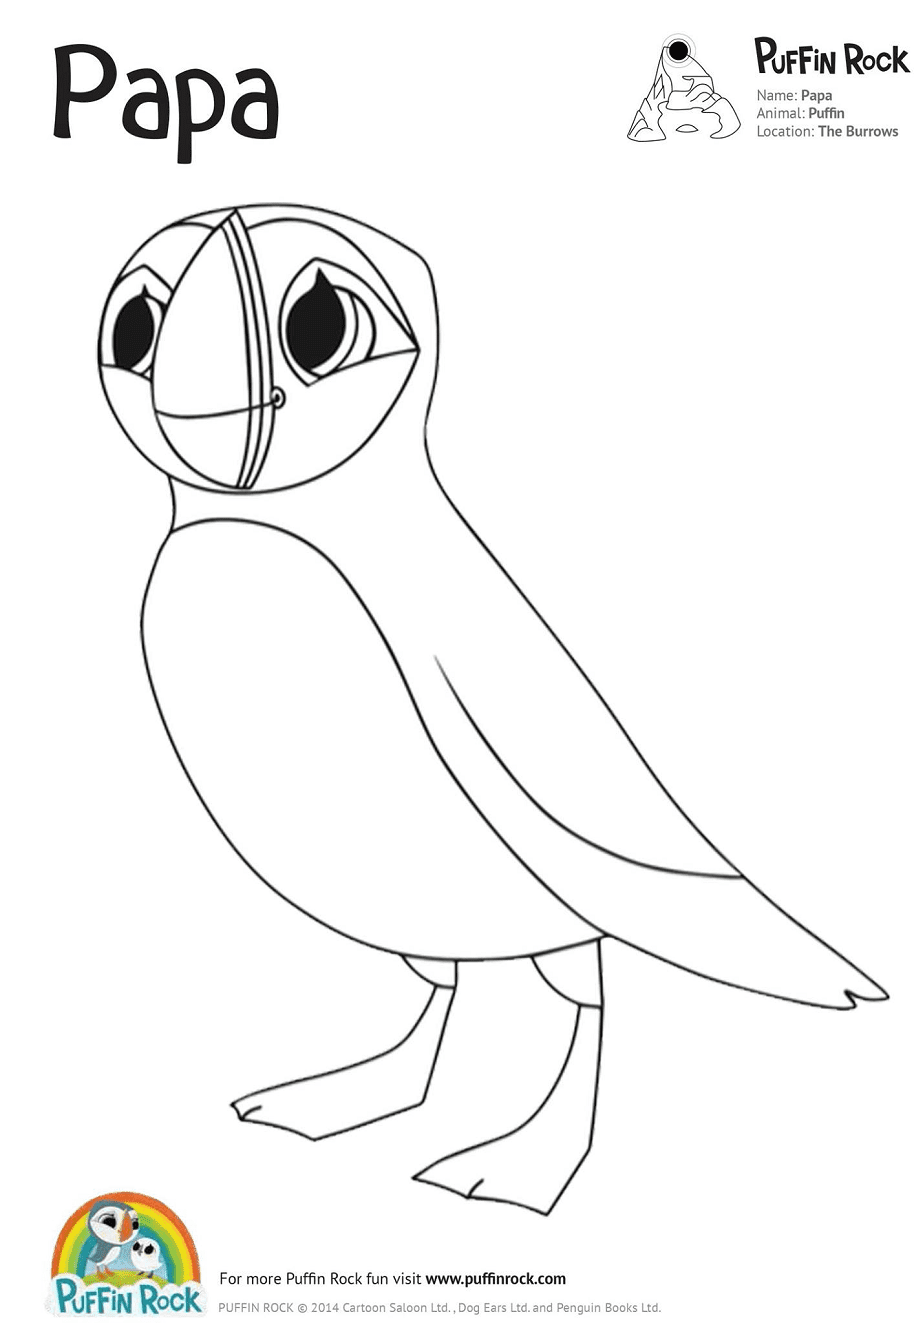 Papa from Puffin Rock Coloring Page